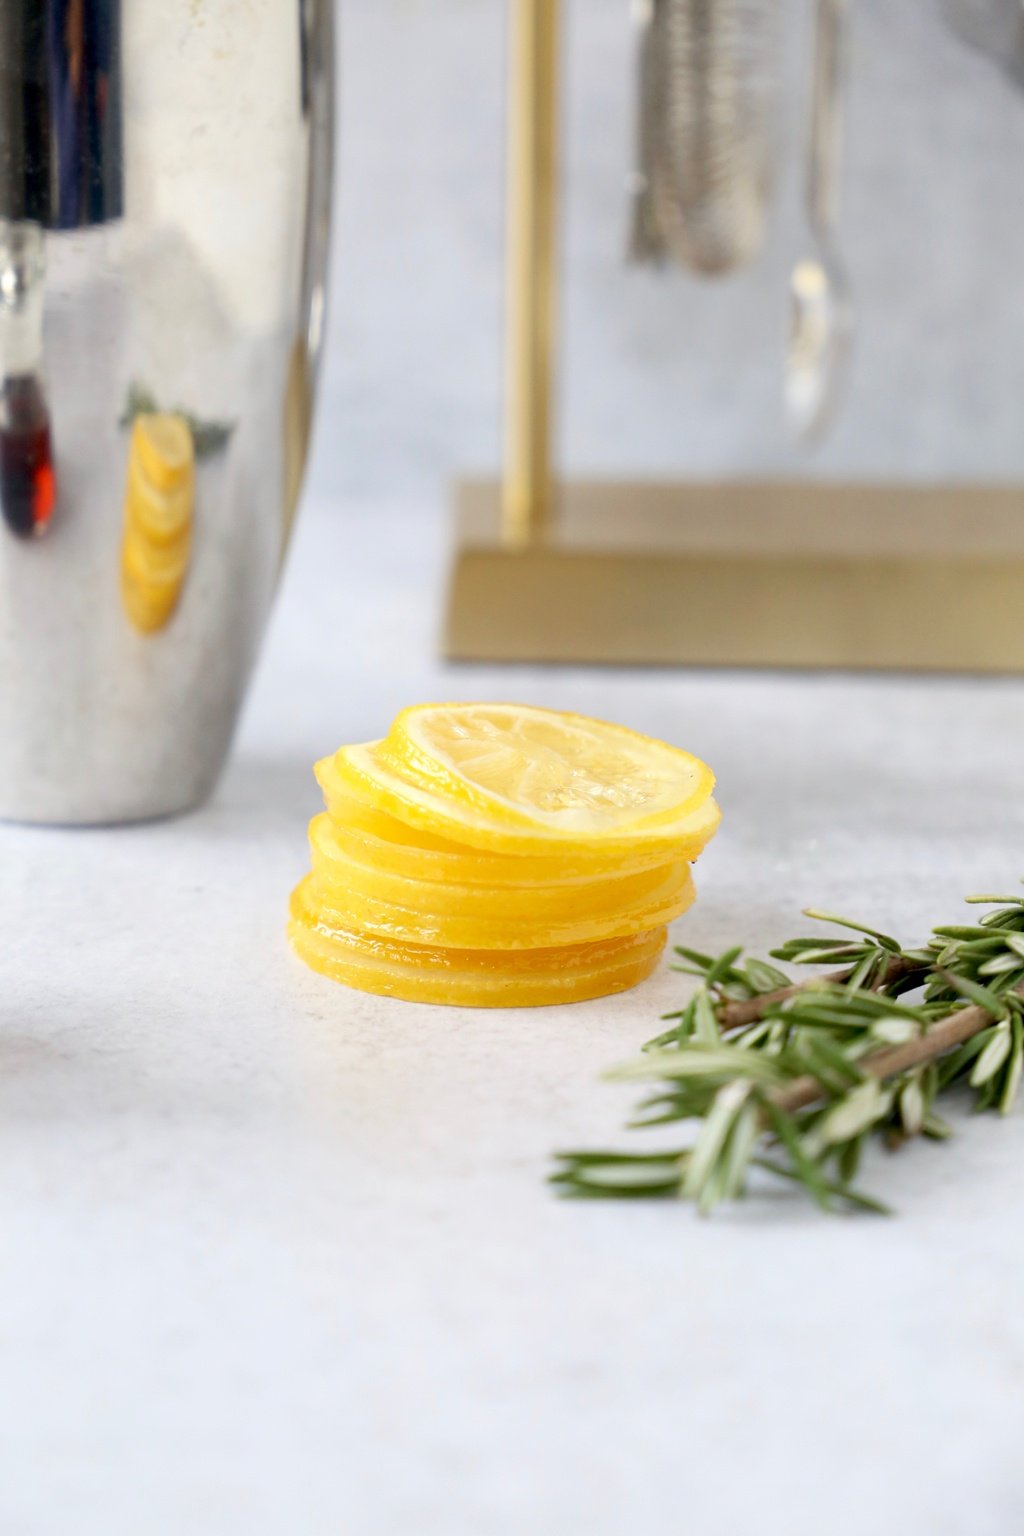 Sliced candied lemons and a sprig of rosemary